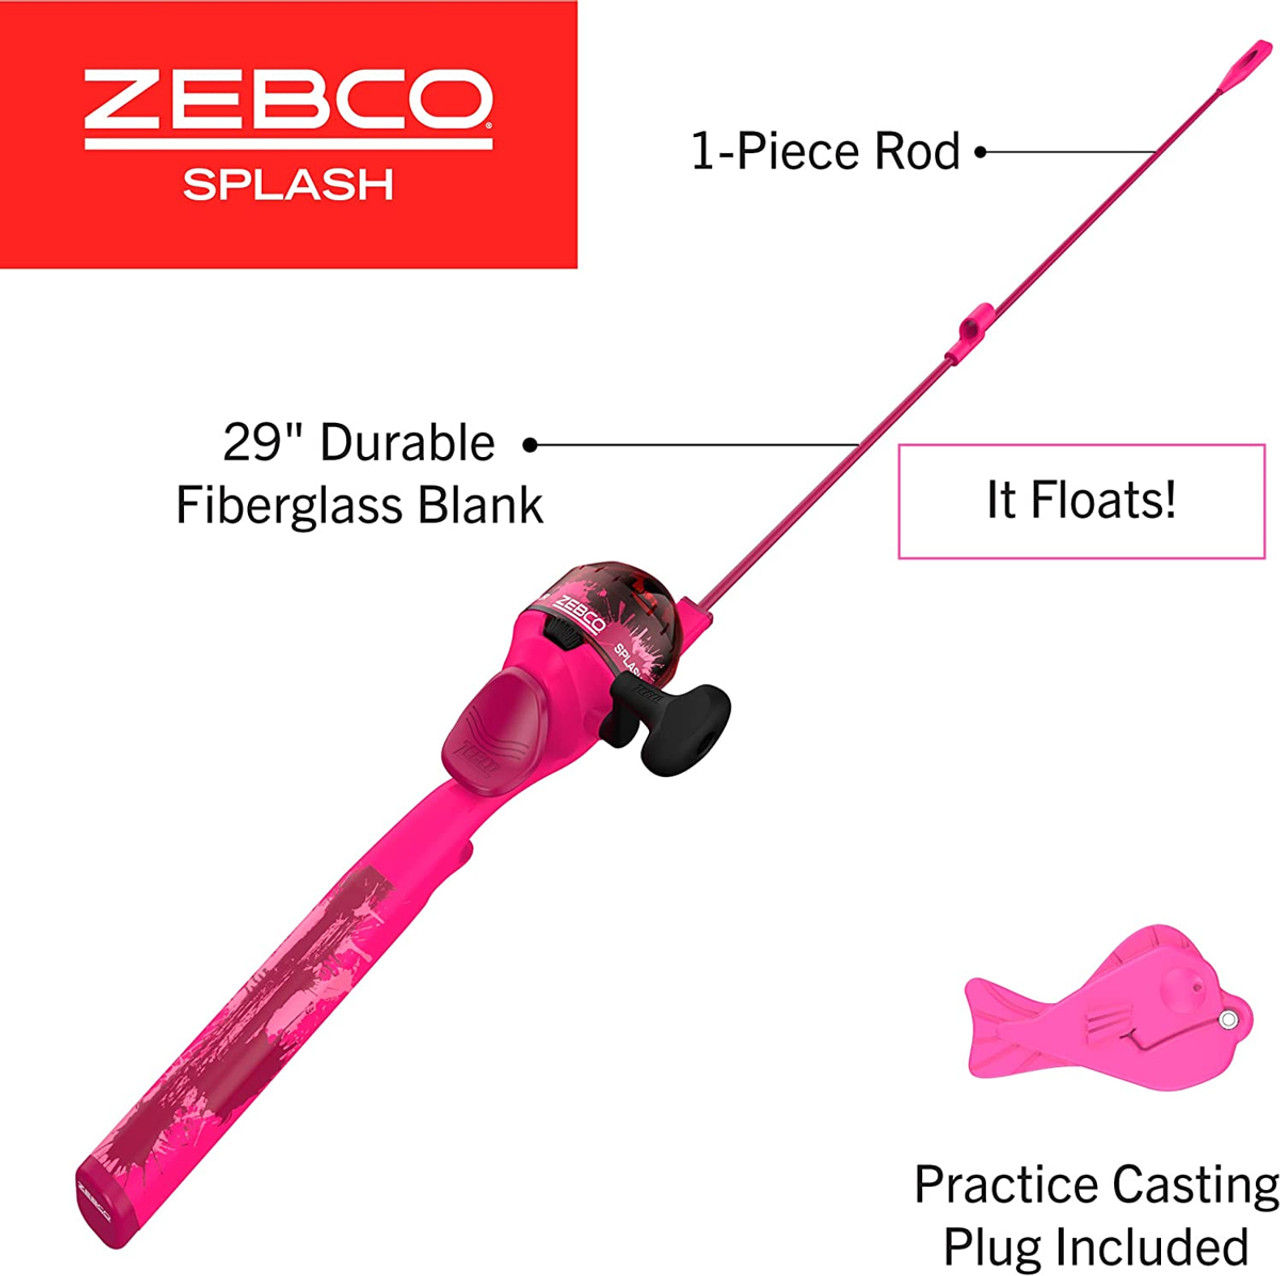 Zebco Ready Tackle Spinning Reel and Fishing Rod Combo, 5-Foot 6-Inch  Fishing Pole, Size 20 Reel, Left-Hand Retrieve, Pre-Spooled with 8-Pound  Zebco